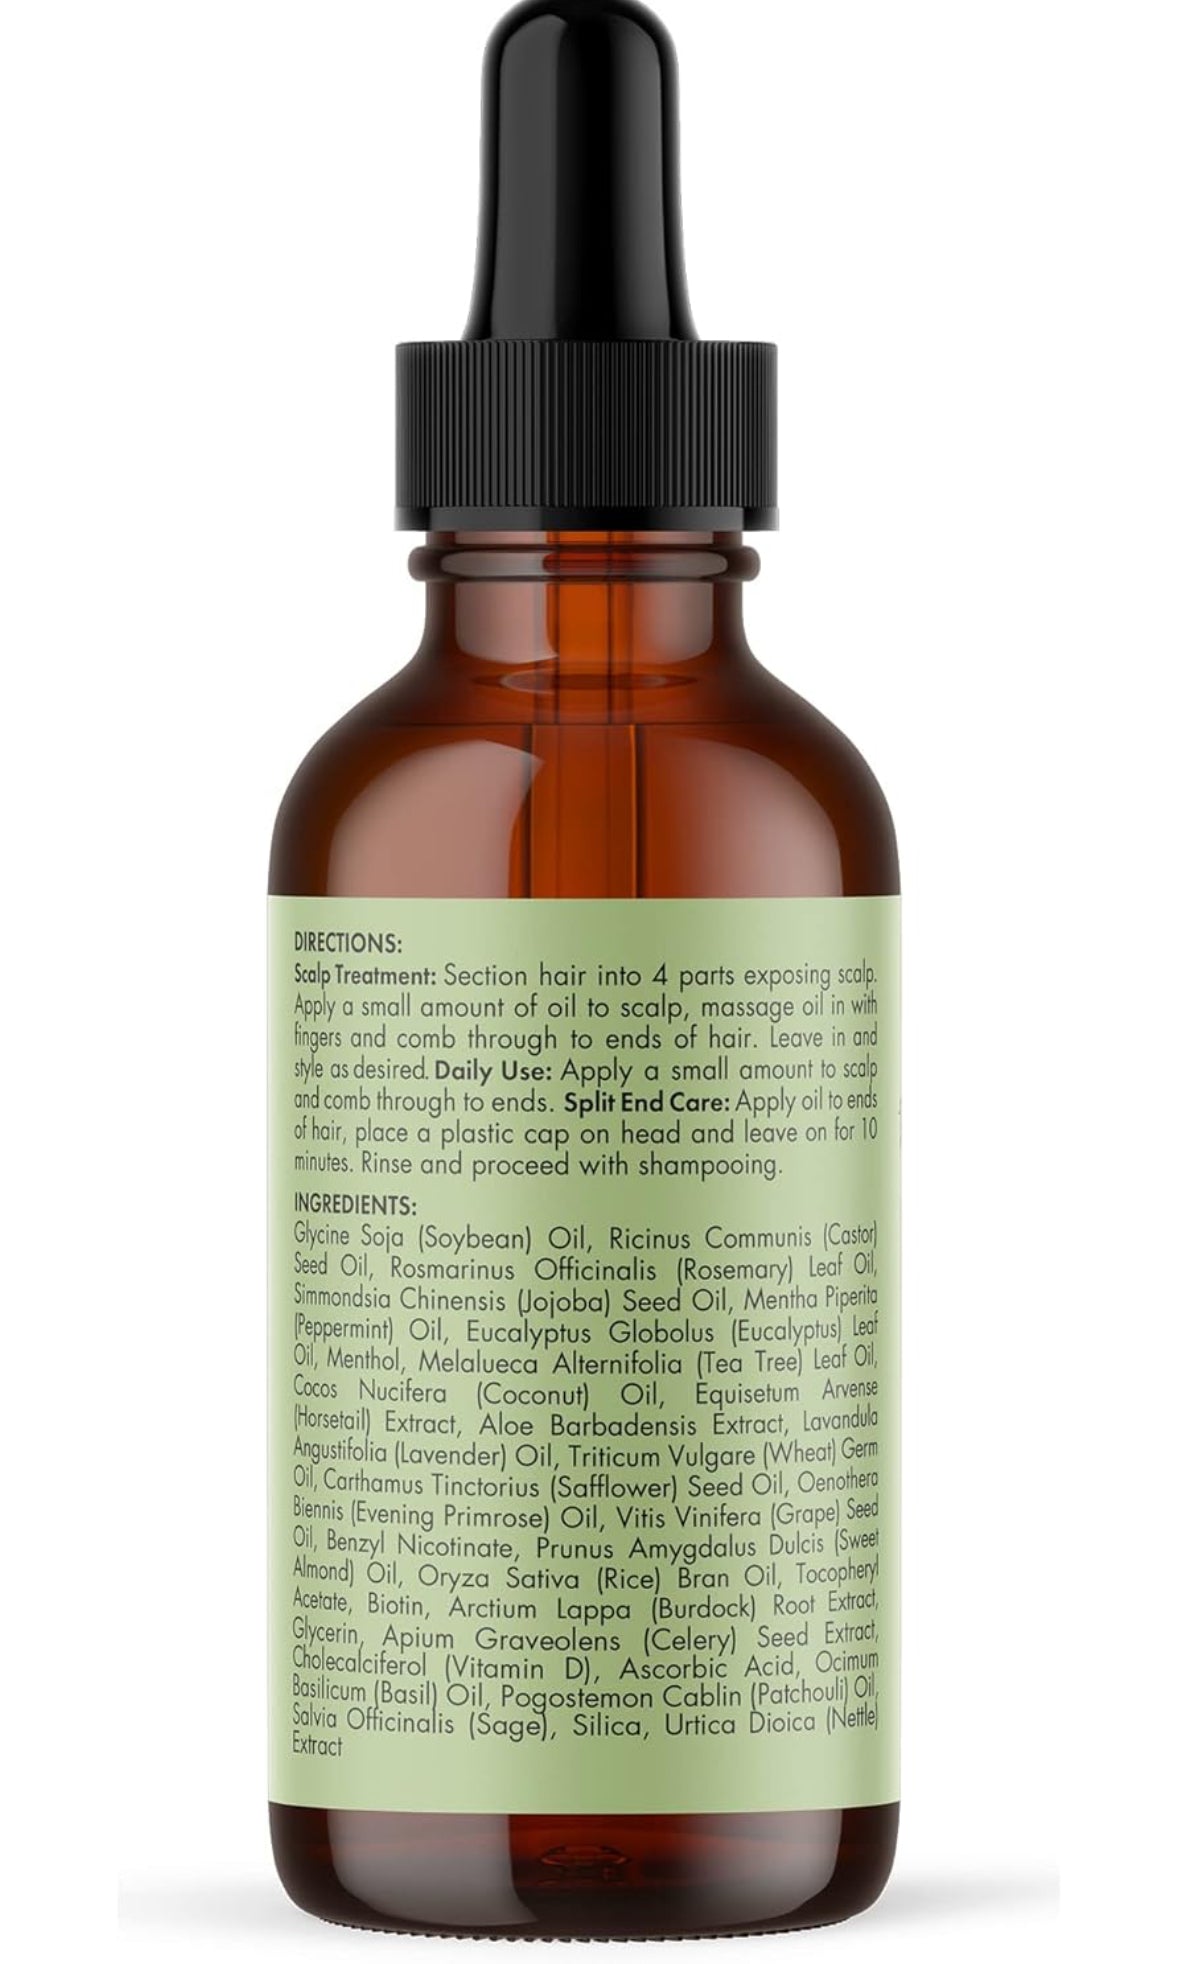 Mielle Organics MIELLE - ROSEMARY MINT, SCALP & HAIR OIL, INFUSED W/BIOTIN & ENCOURGES GROWTH - Package may vary - Medaid - Lebanon